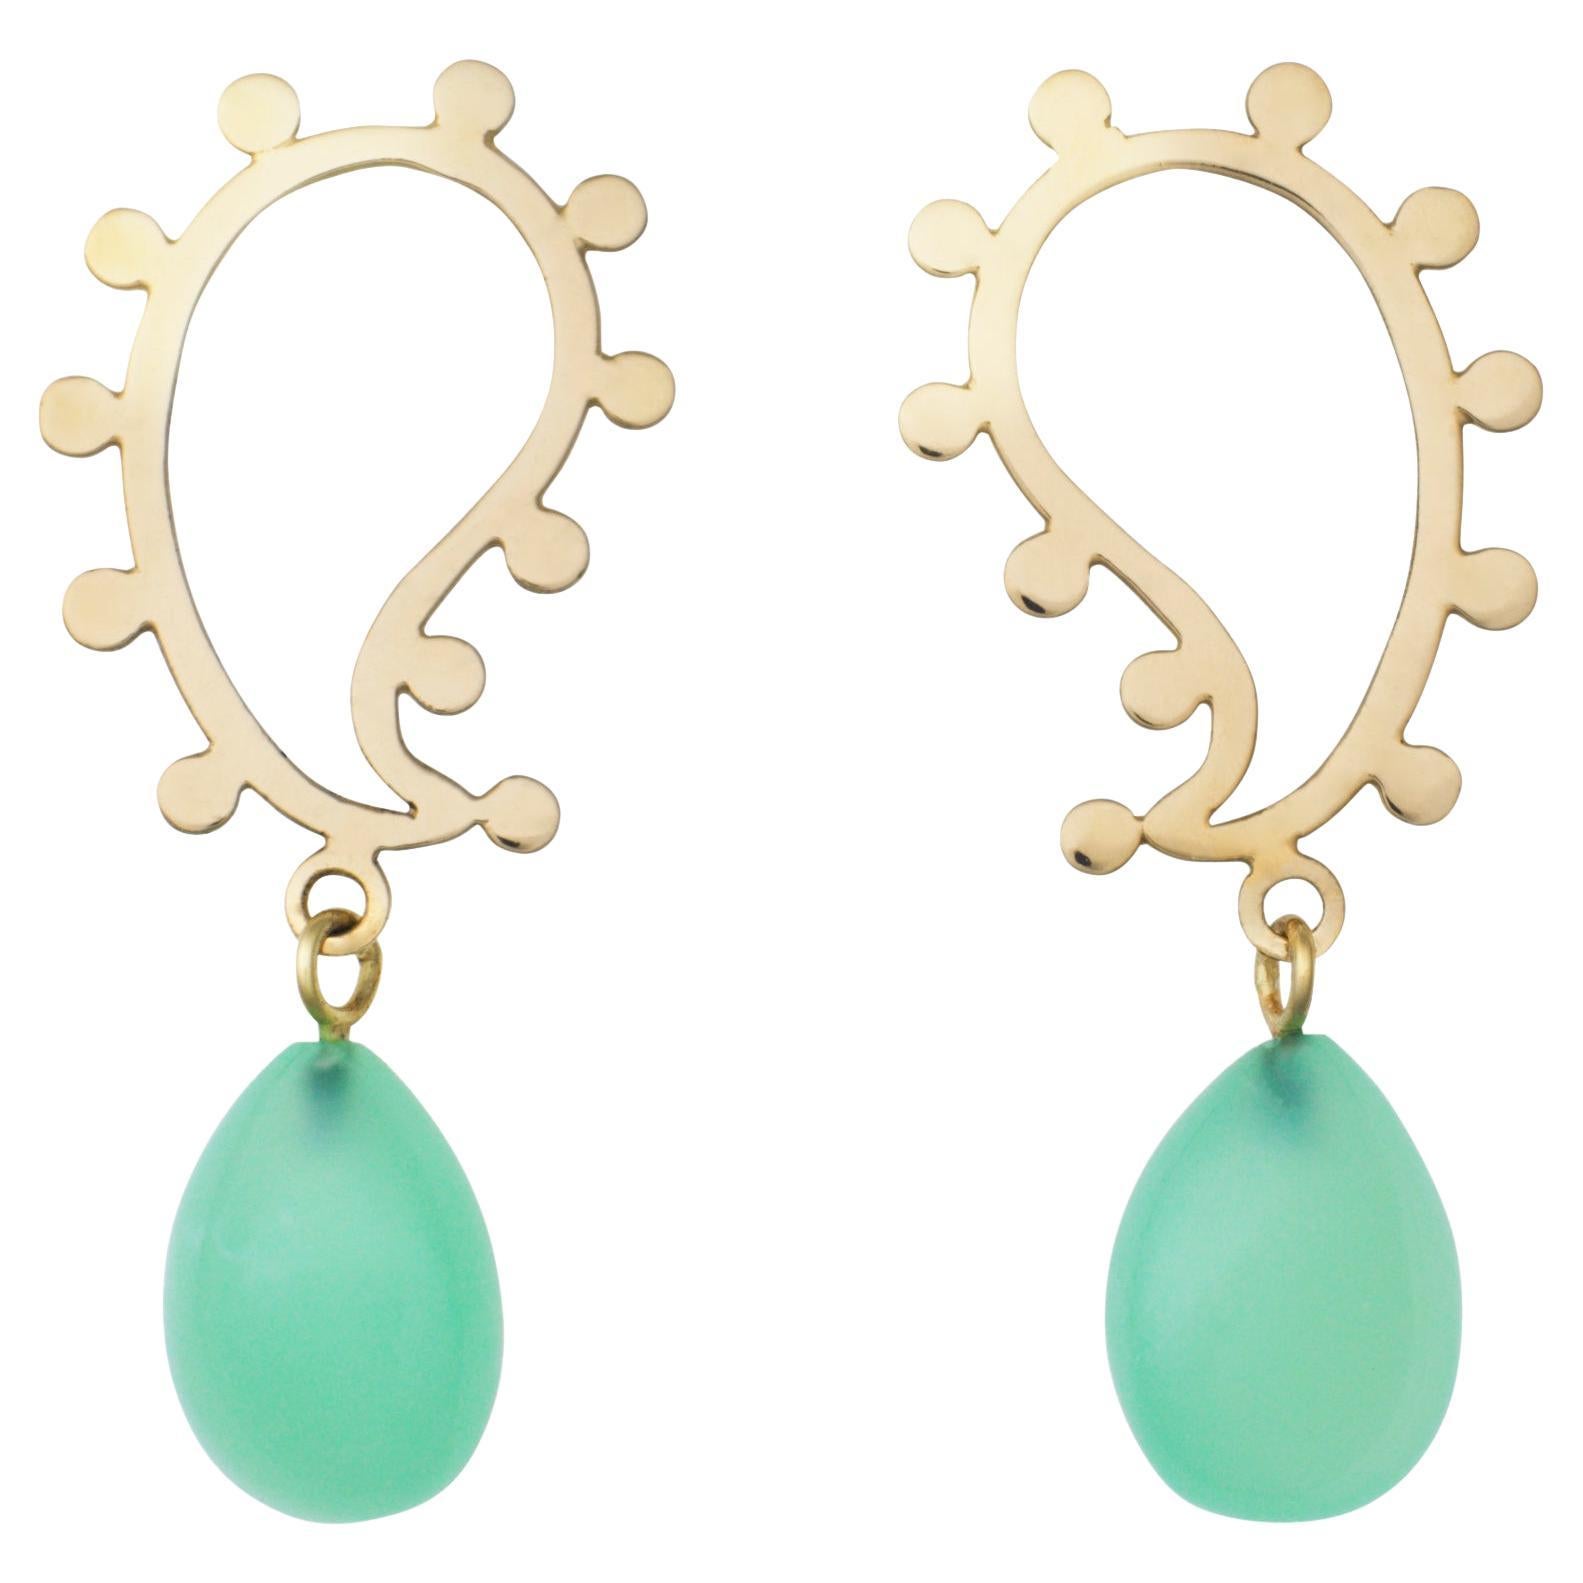 18k Gold Paisley Earrings with Cabochon Chrysoprase Drops